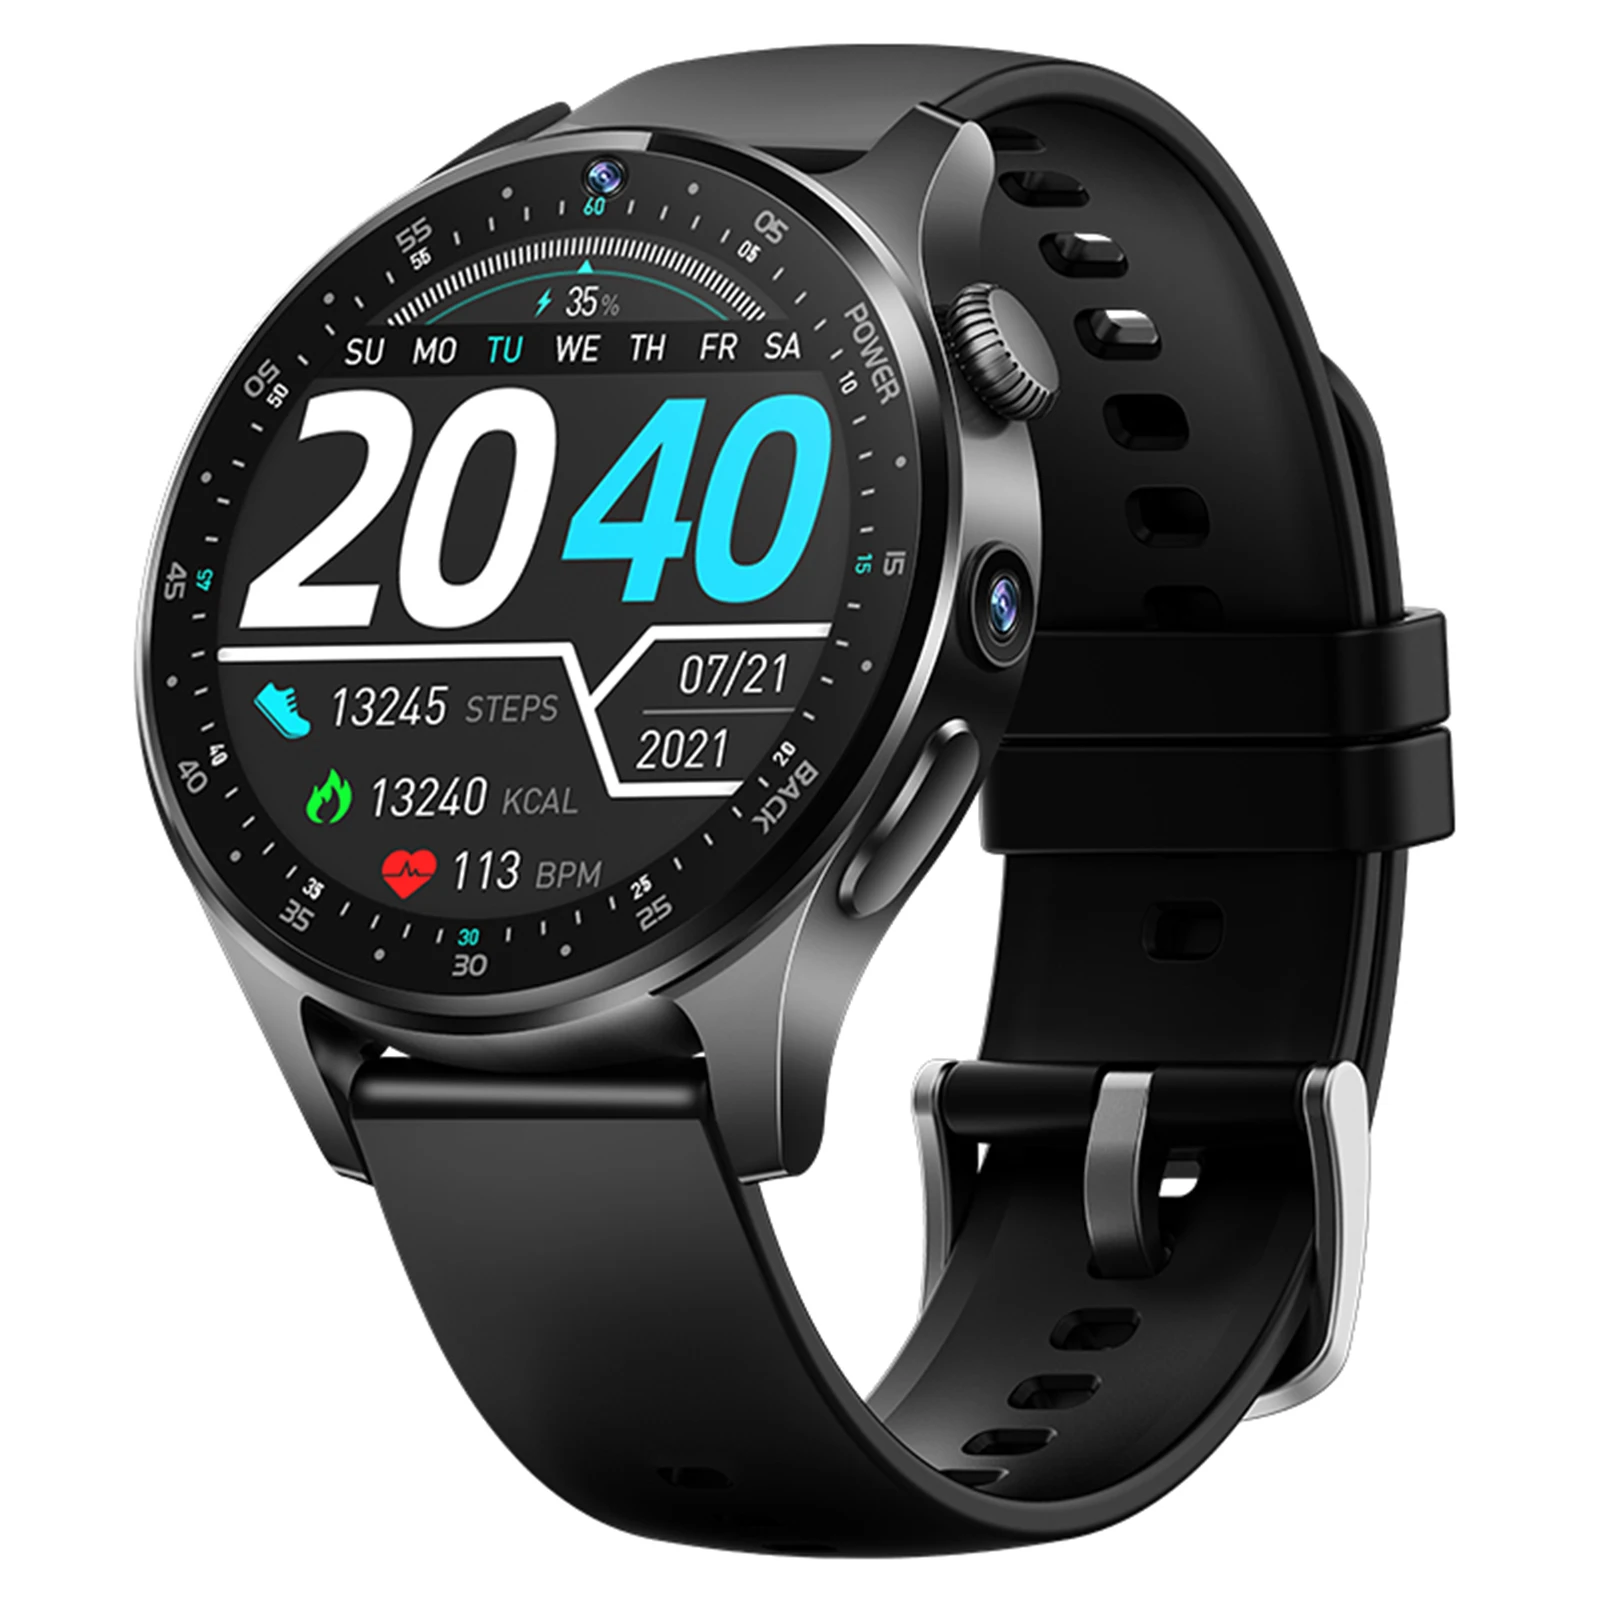 

Waterproof Smartwatch Digital Fitness Tracker IP68 Wireless Activity Tracker With Blue-tooth Call Face ID Unlock Heart Rate